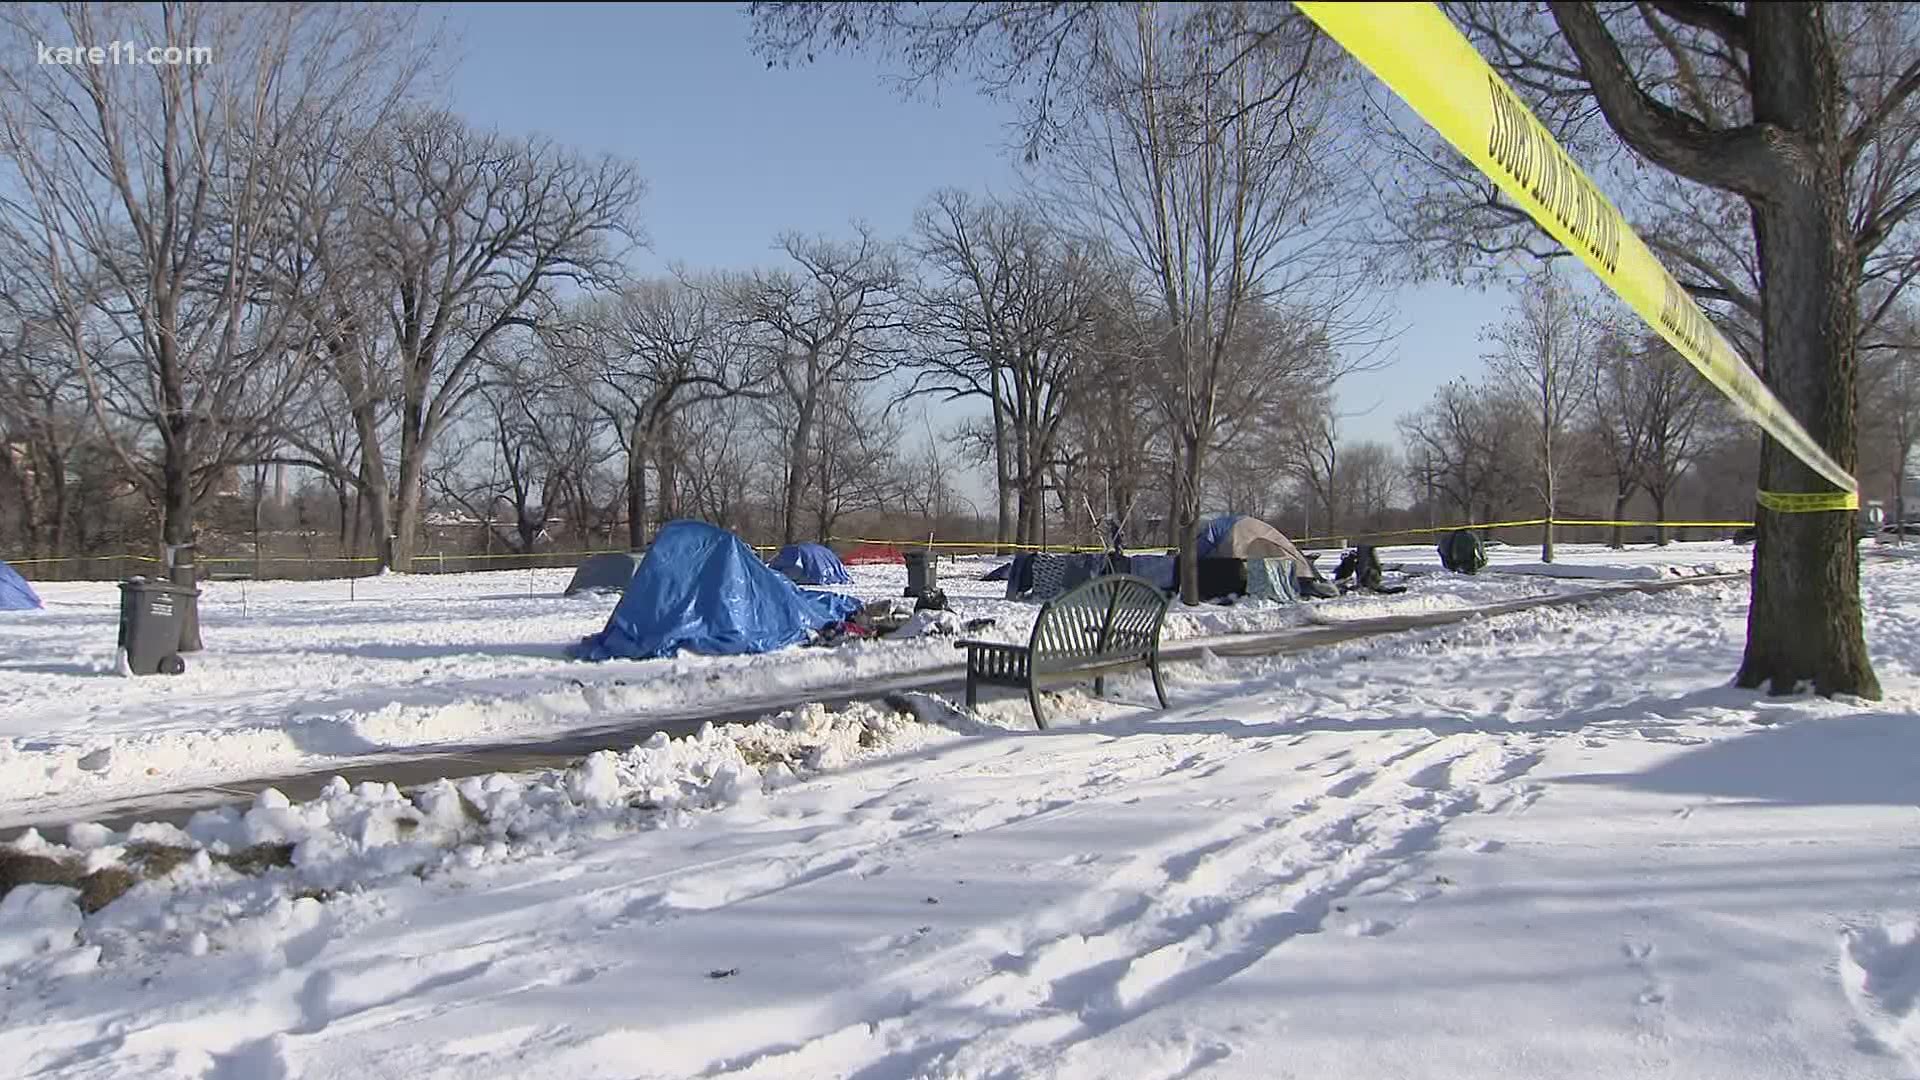 Police say man was found dead inside a tent with signs of trauma.